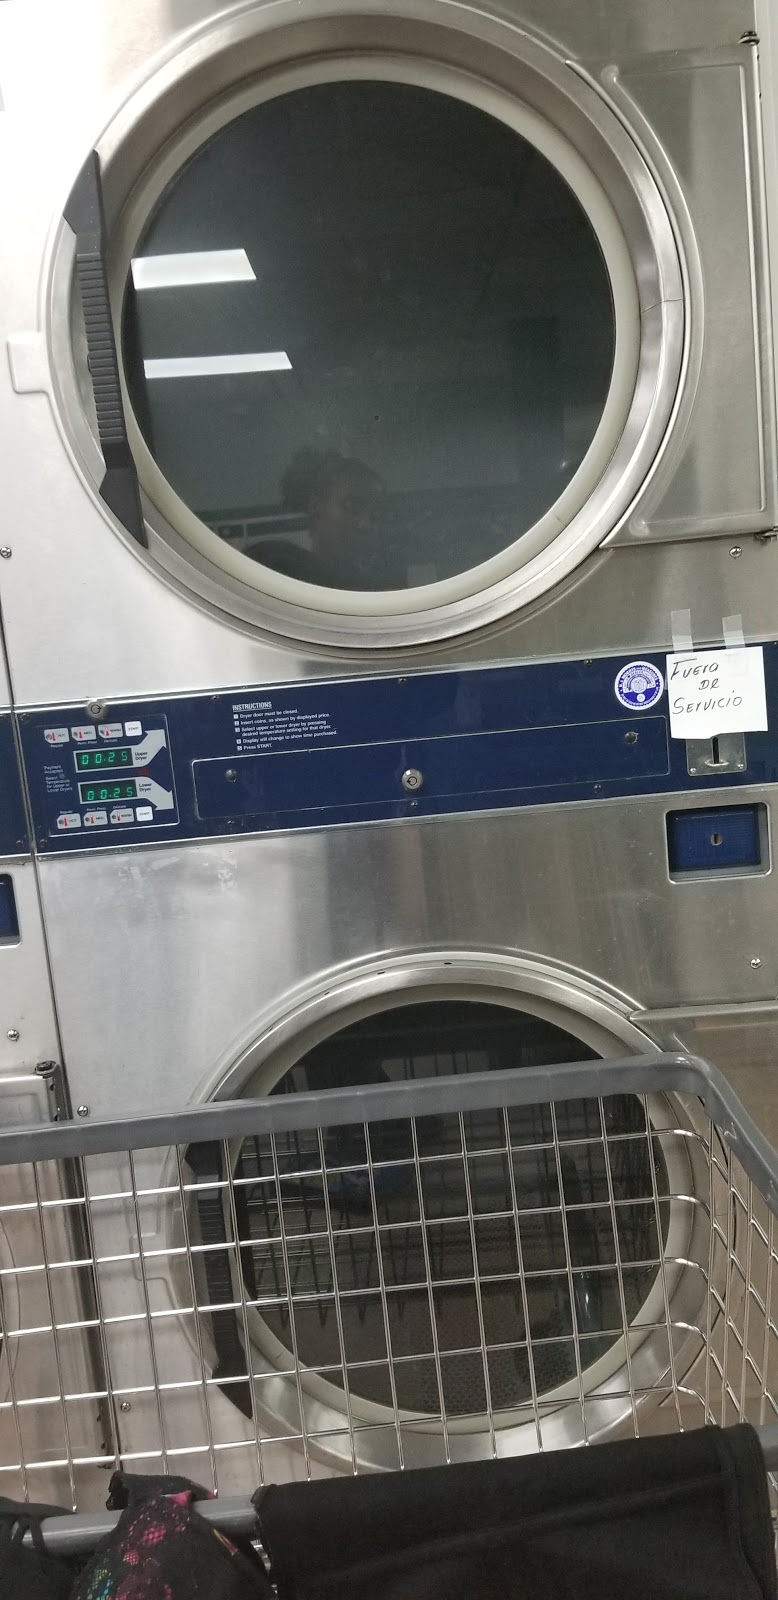 Clean and Clear Laundromat | 1532, 204 W 7th St, Plainfield, NJ 07060 | Phone: (908) 769-7833